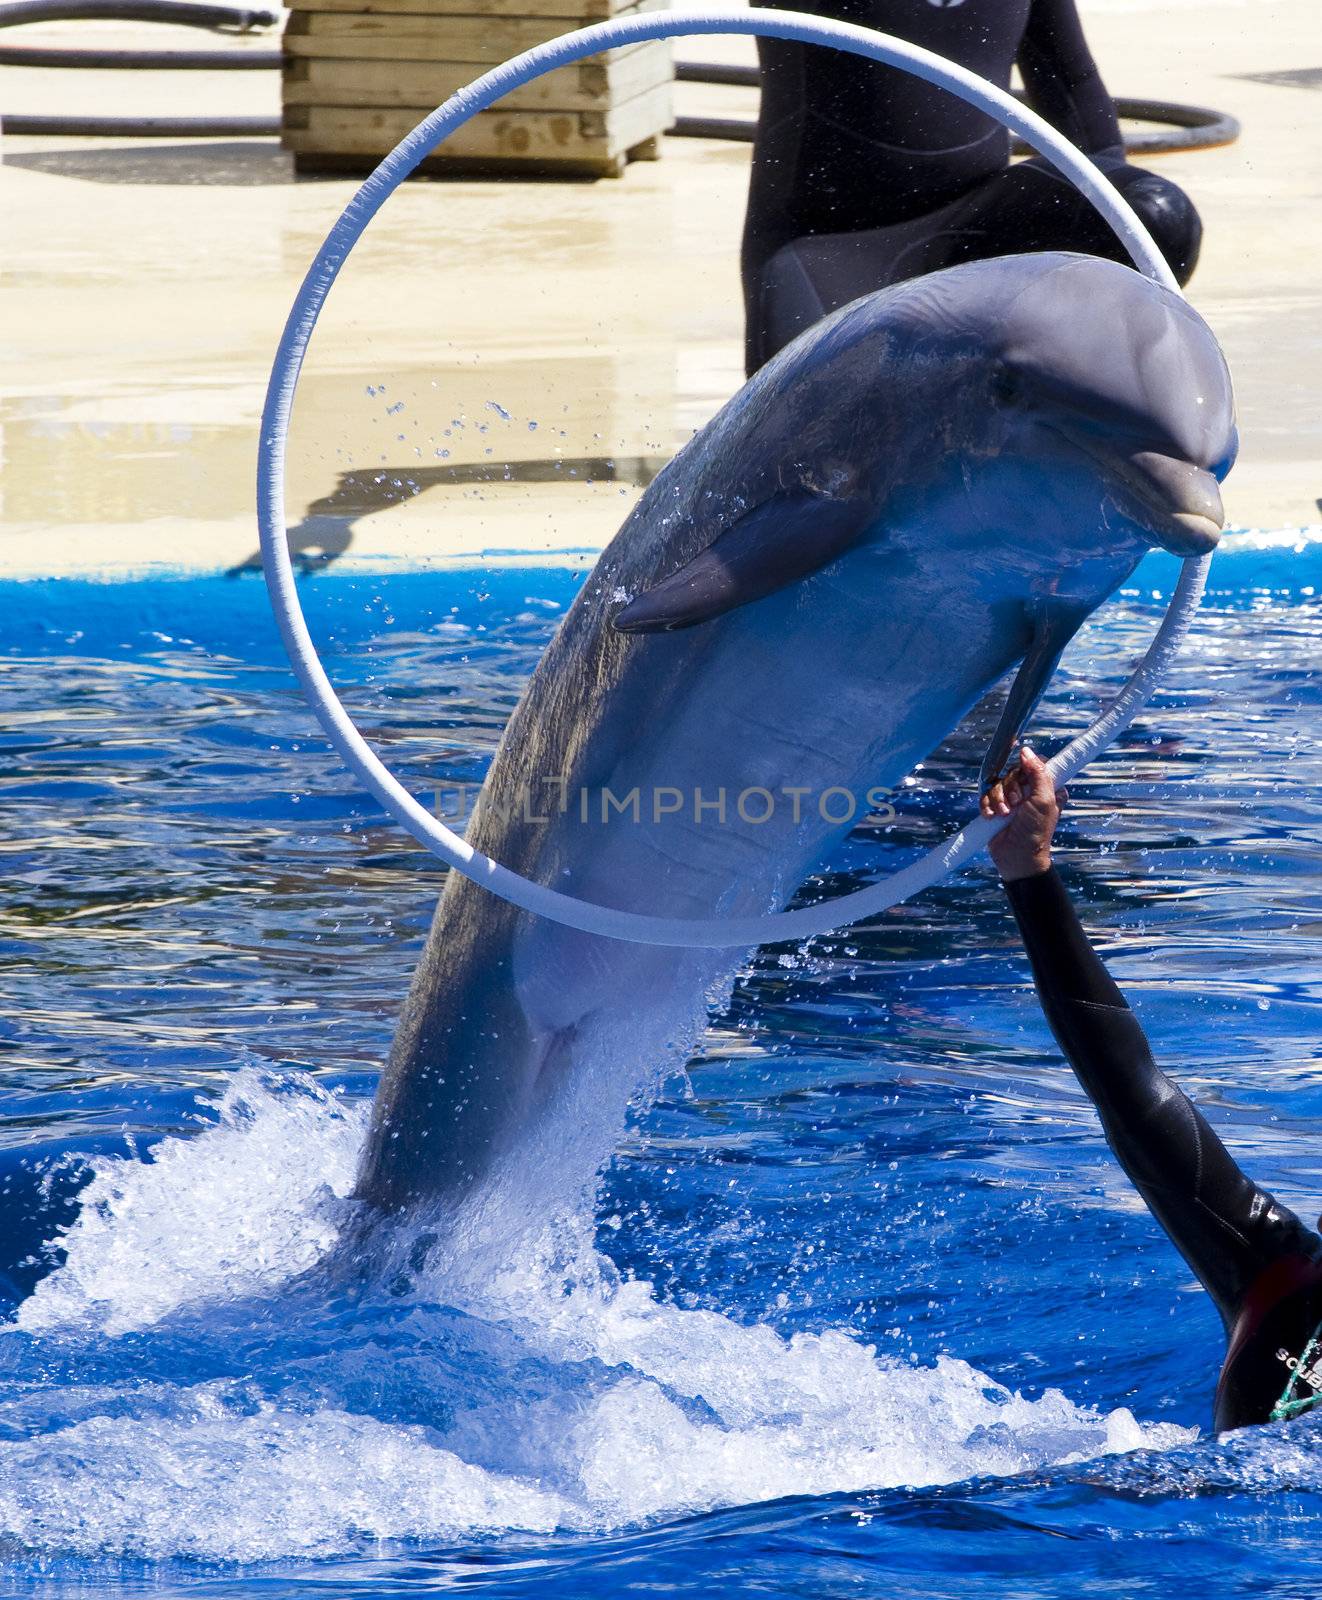 dolphin jump out of the water in pool by FernandoCortes